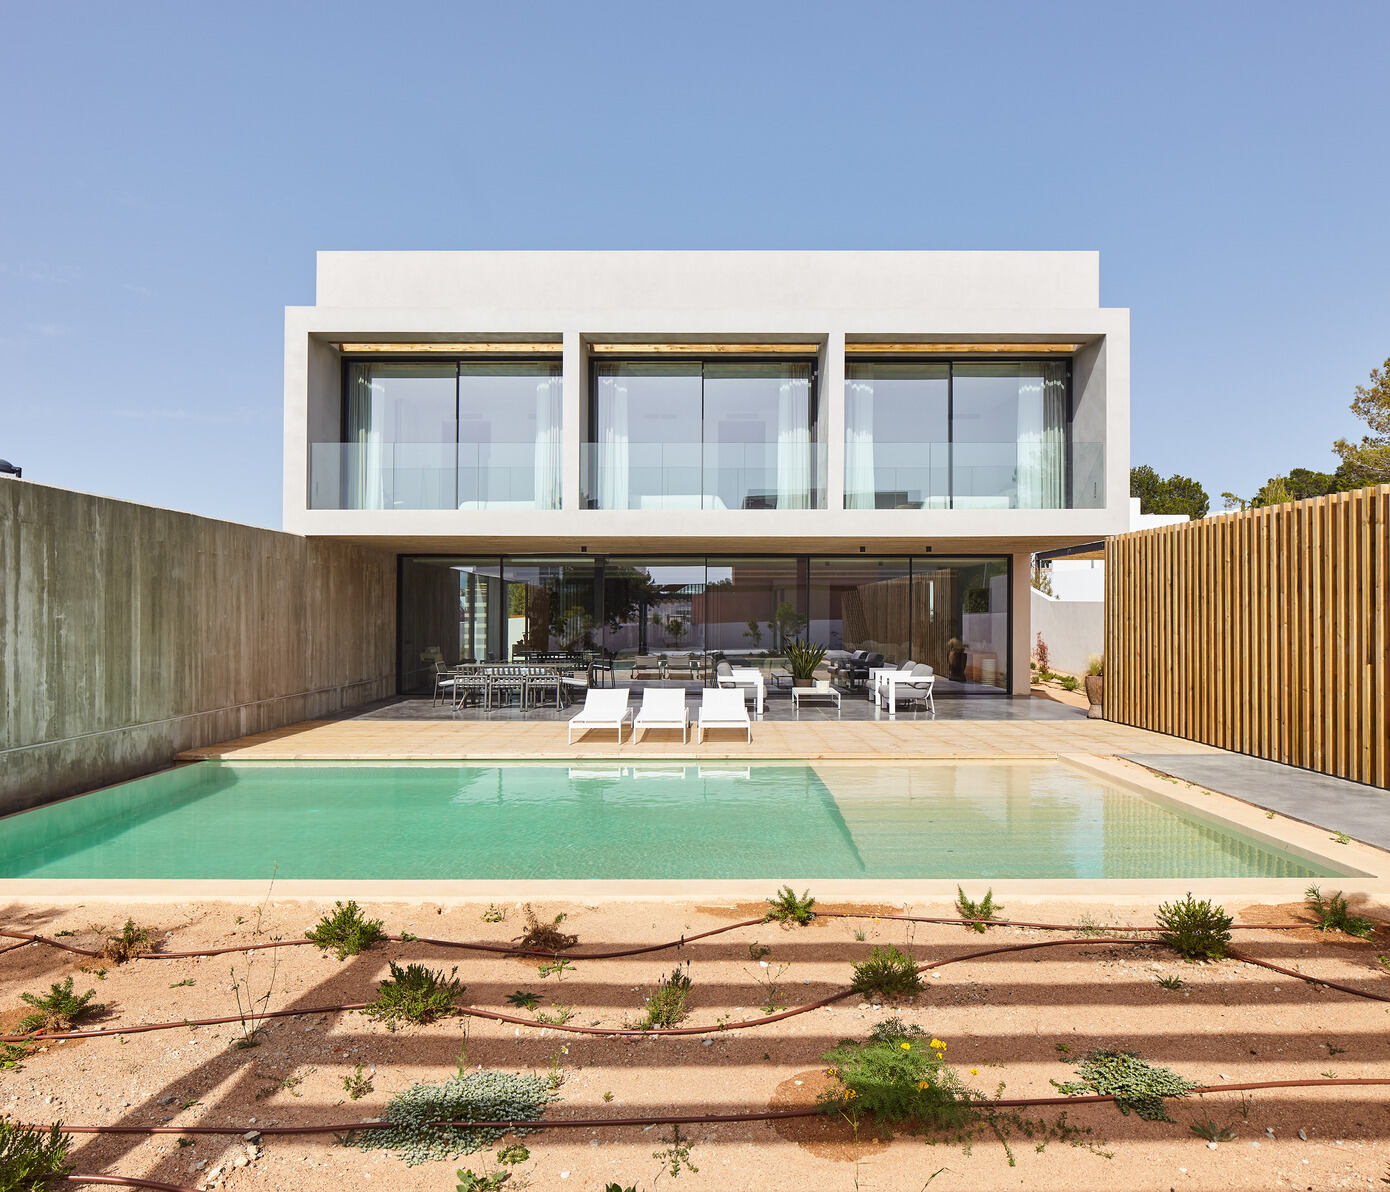 First of a Kind Houses: A Journey Through Courtyards and Panoramic Views